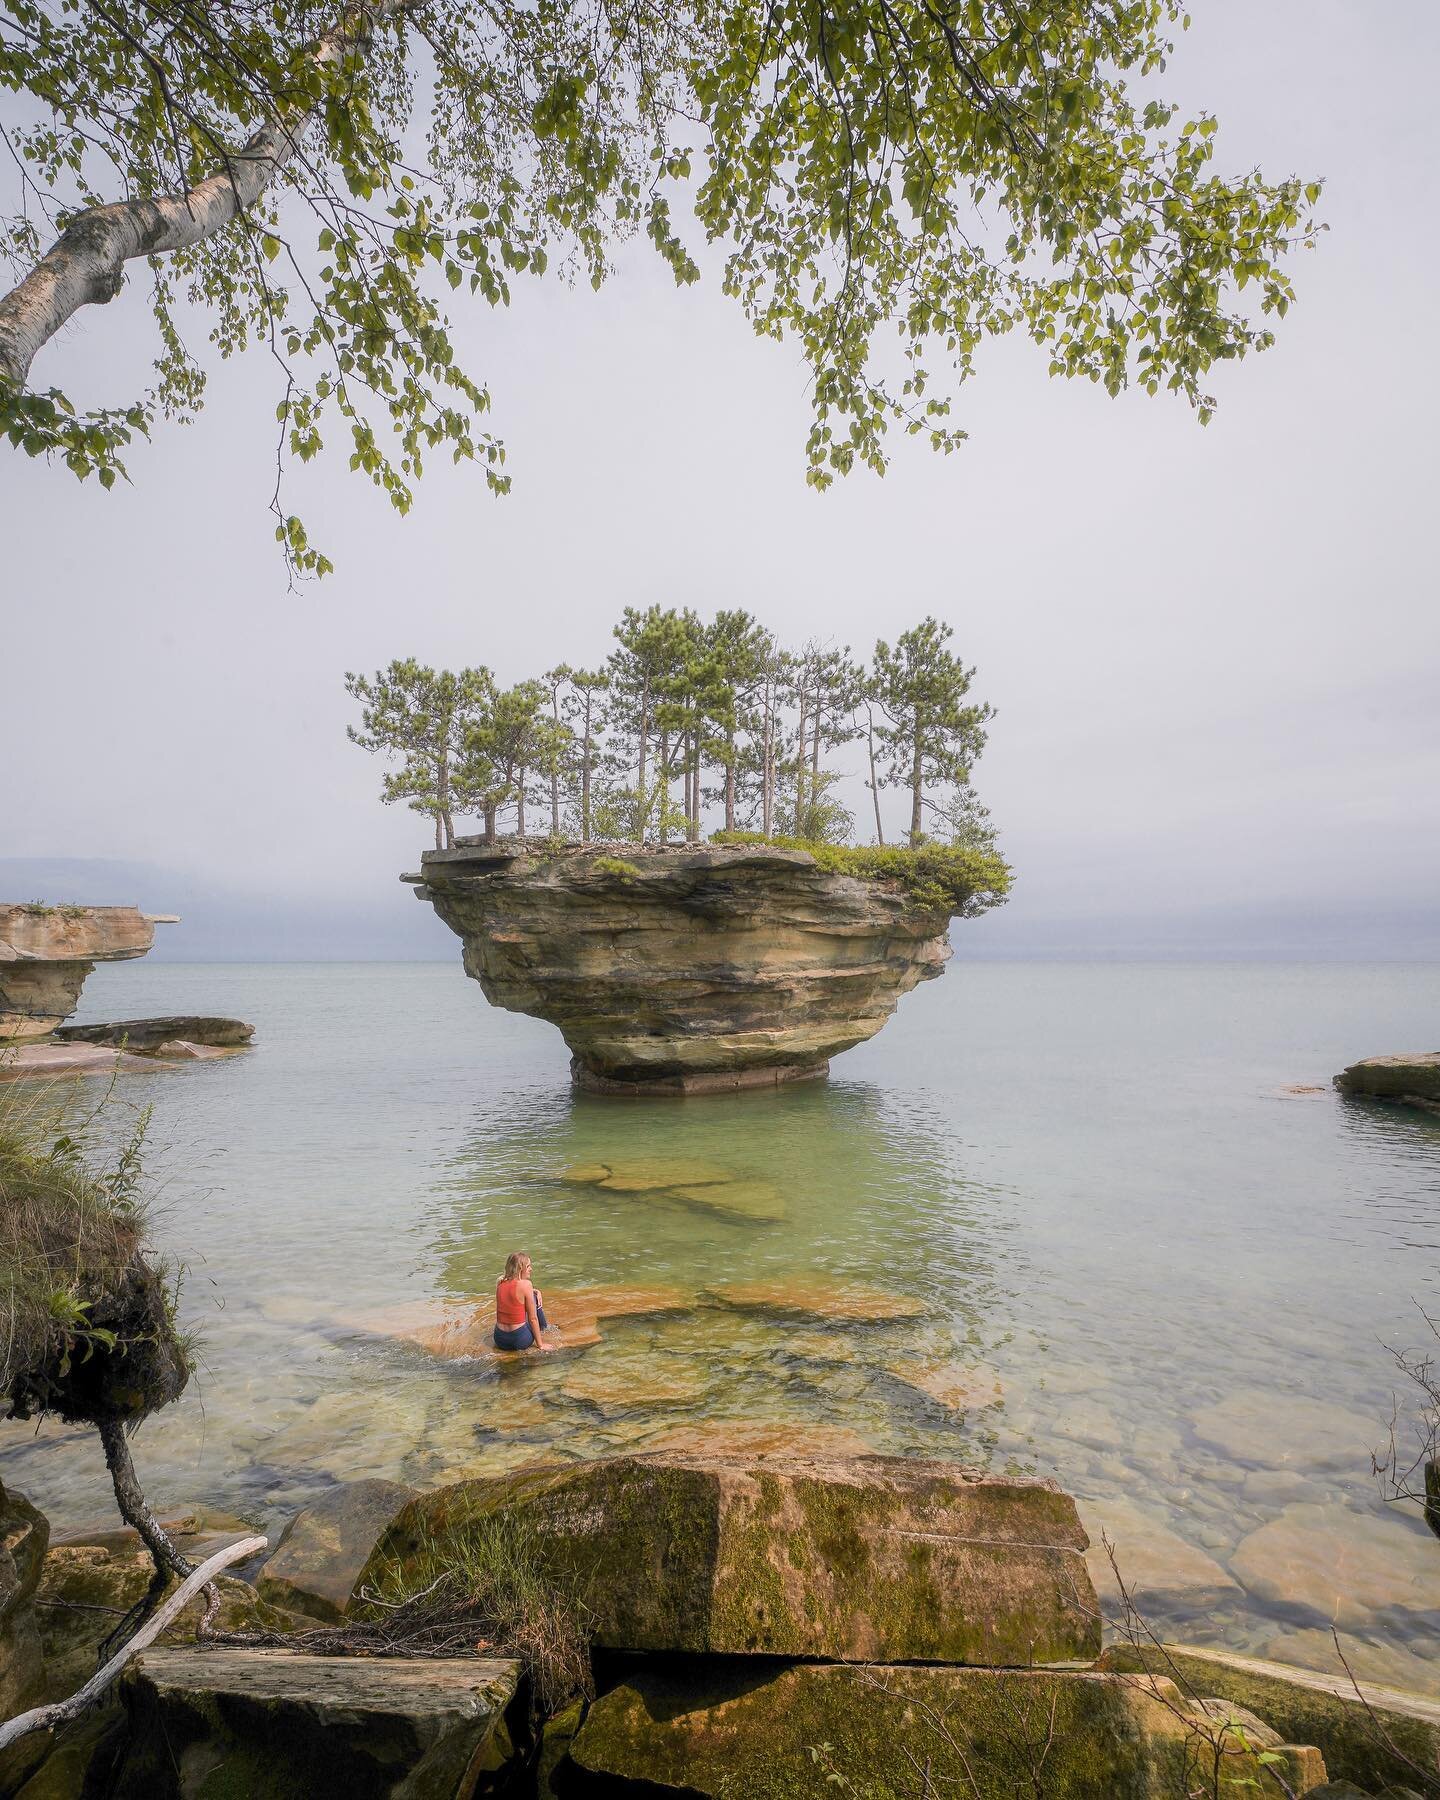 Made it to Michigan last night! Took a little paddle through some beautiful water and strange rock formations.